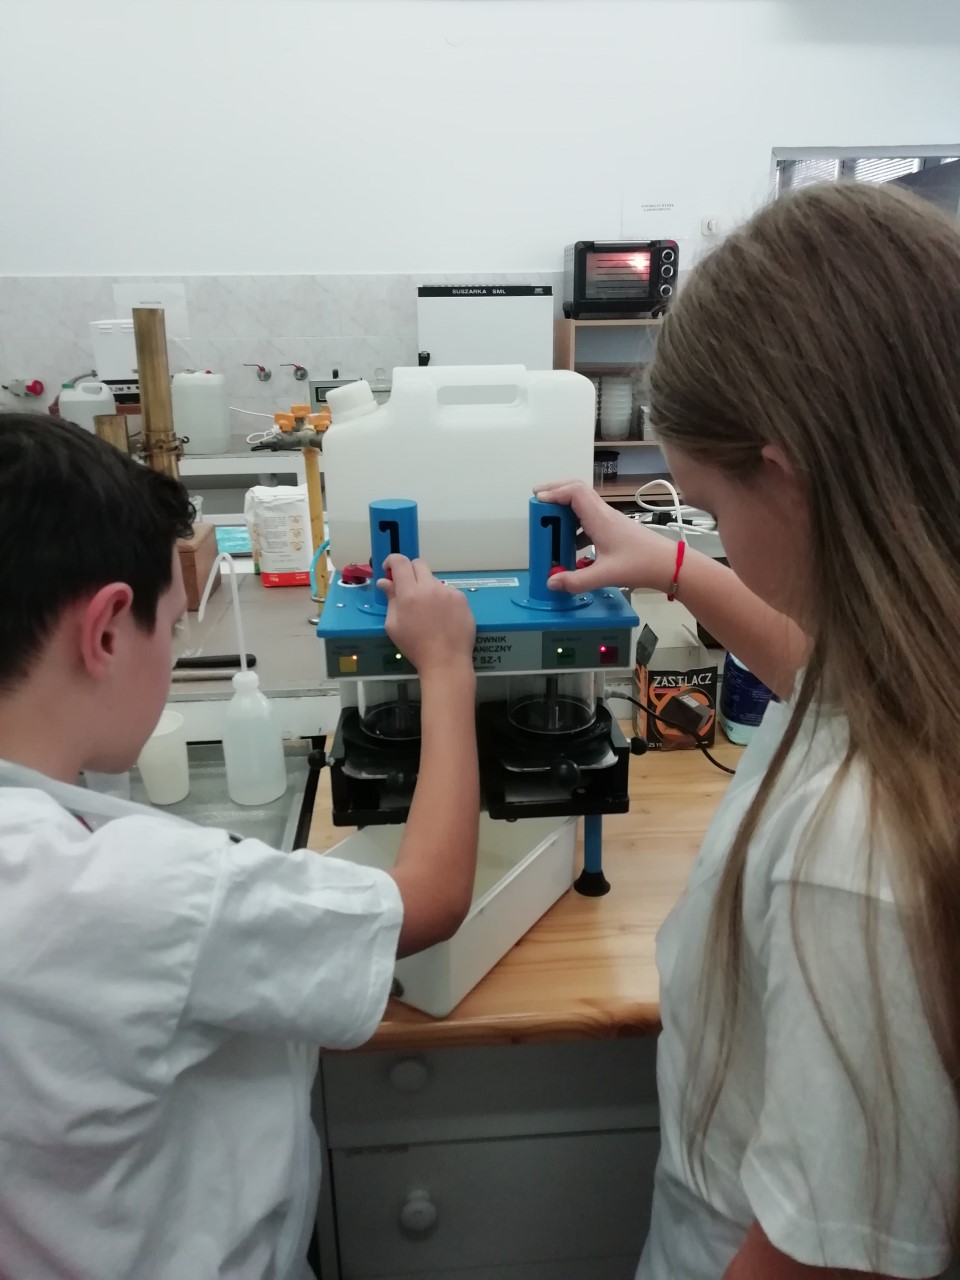 Laboratory. Two children, a boy and a girl, start up a specialized centrifuge